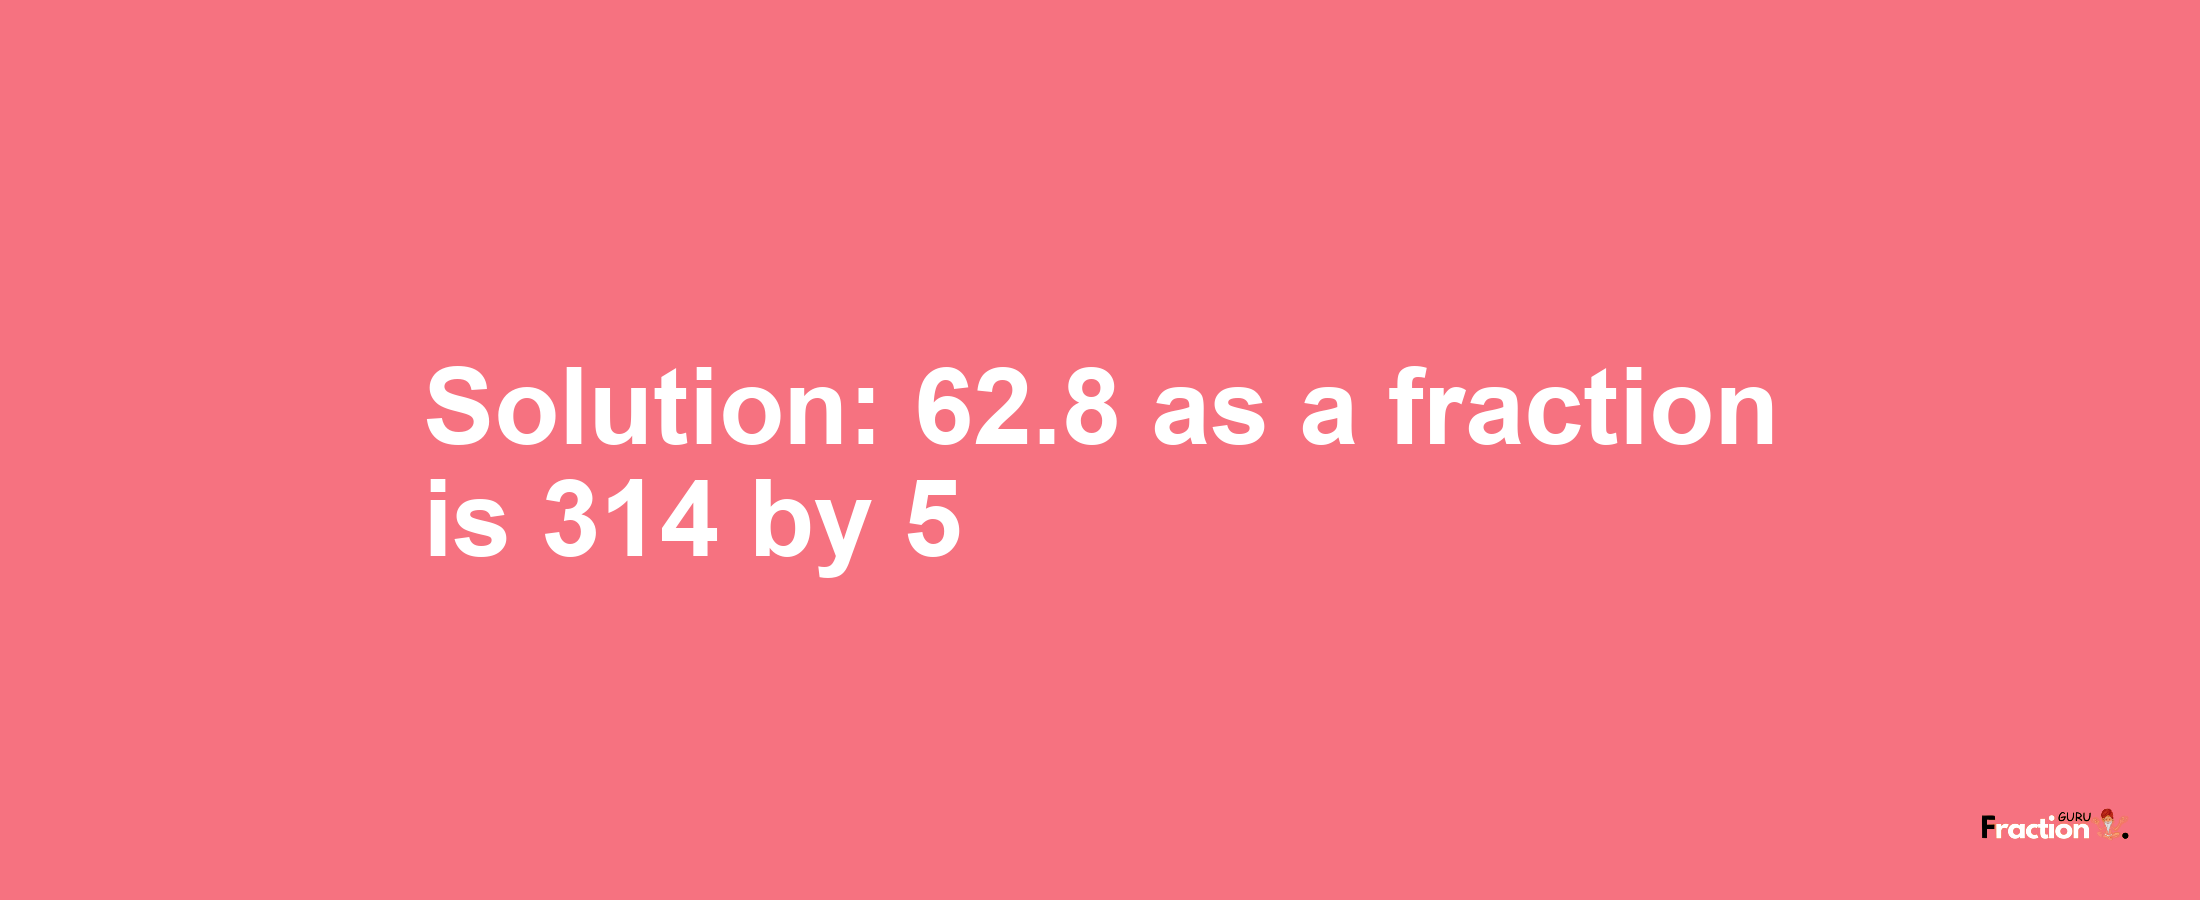 Solution:62.8 as a fraction is 314/5